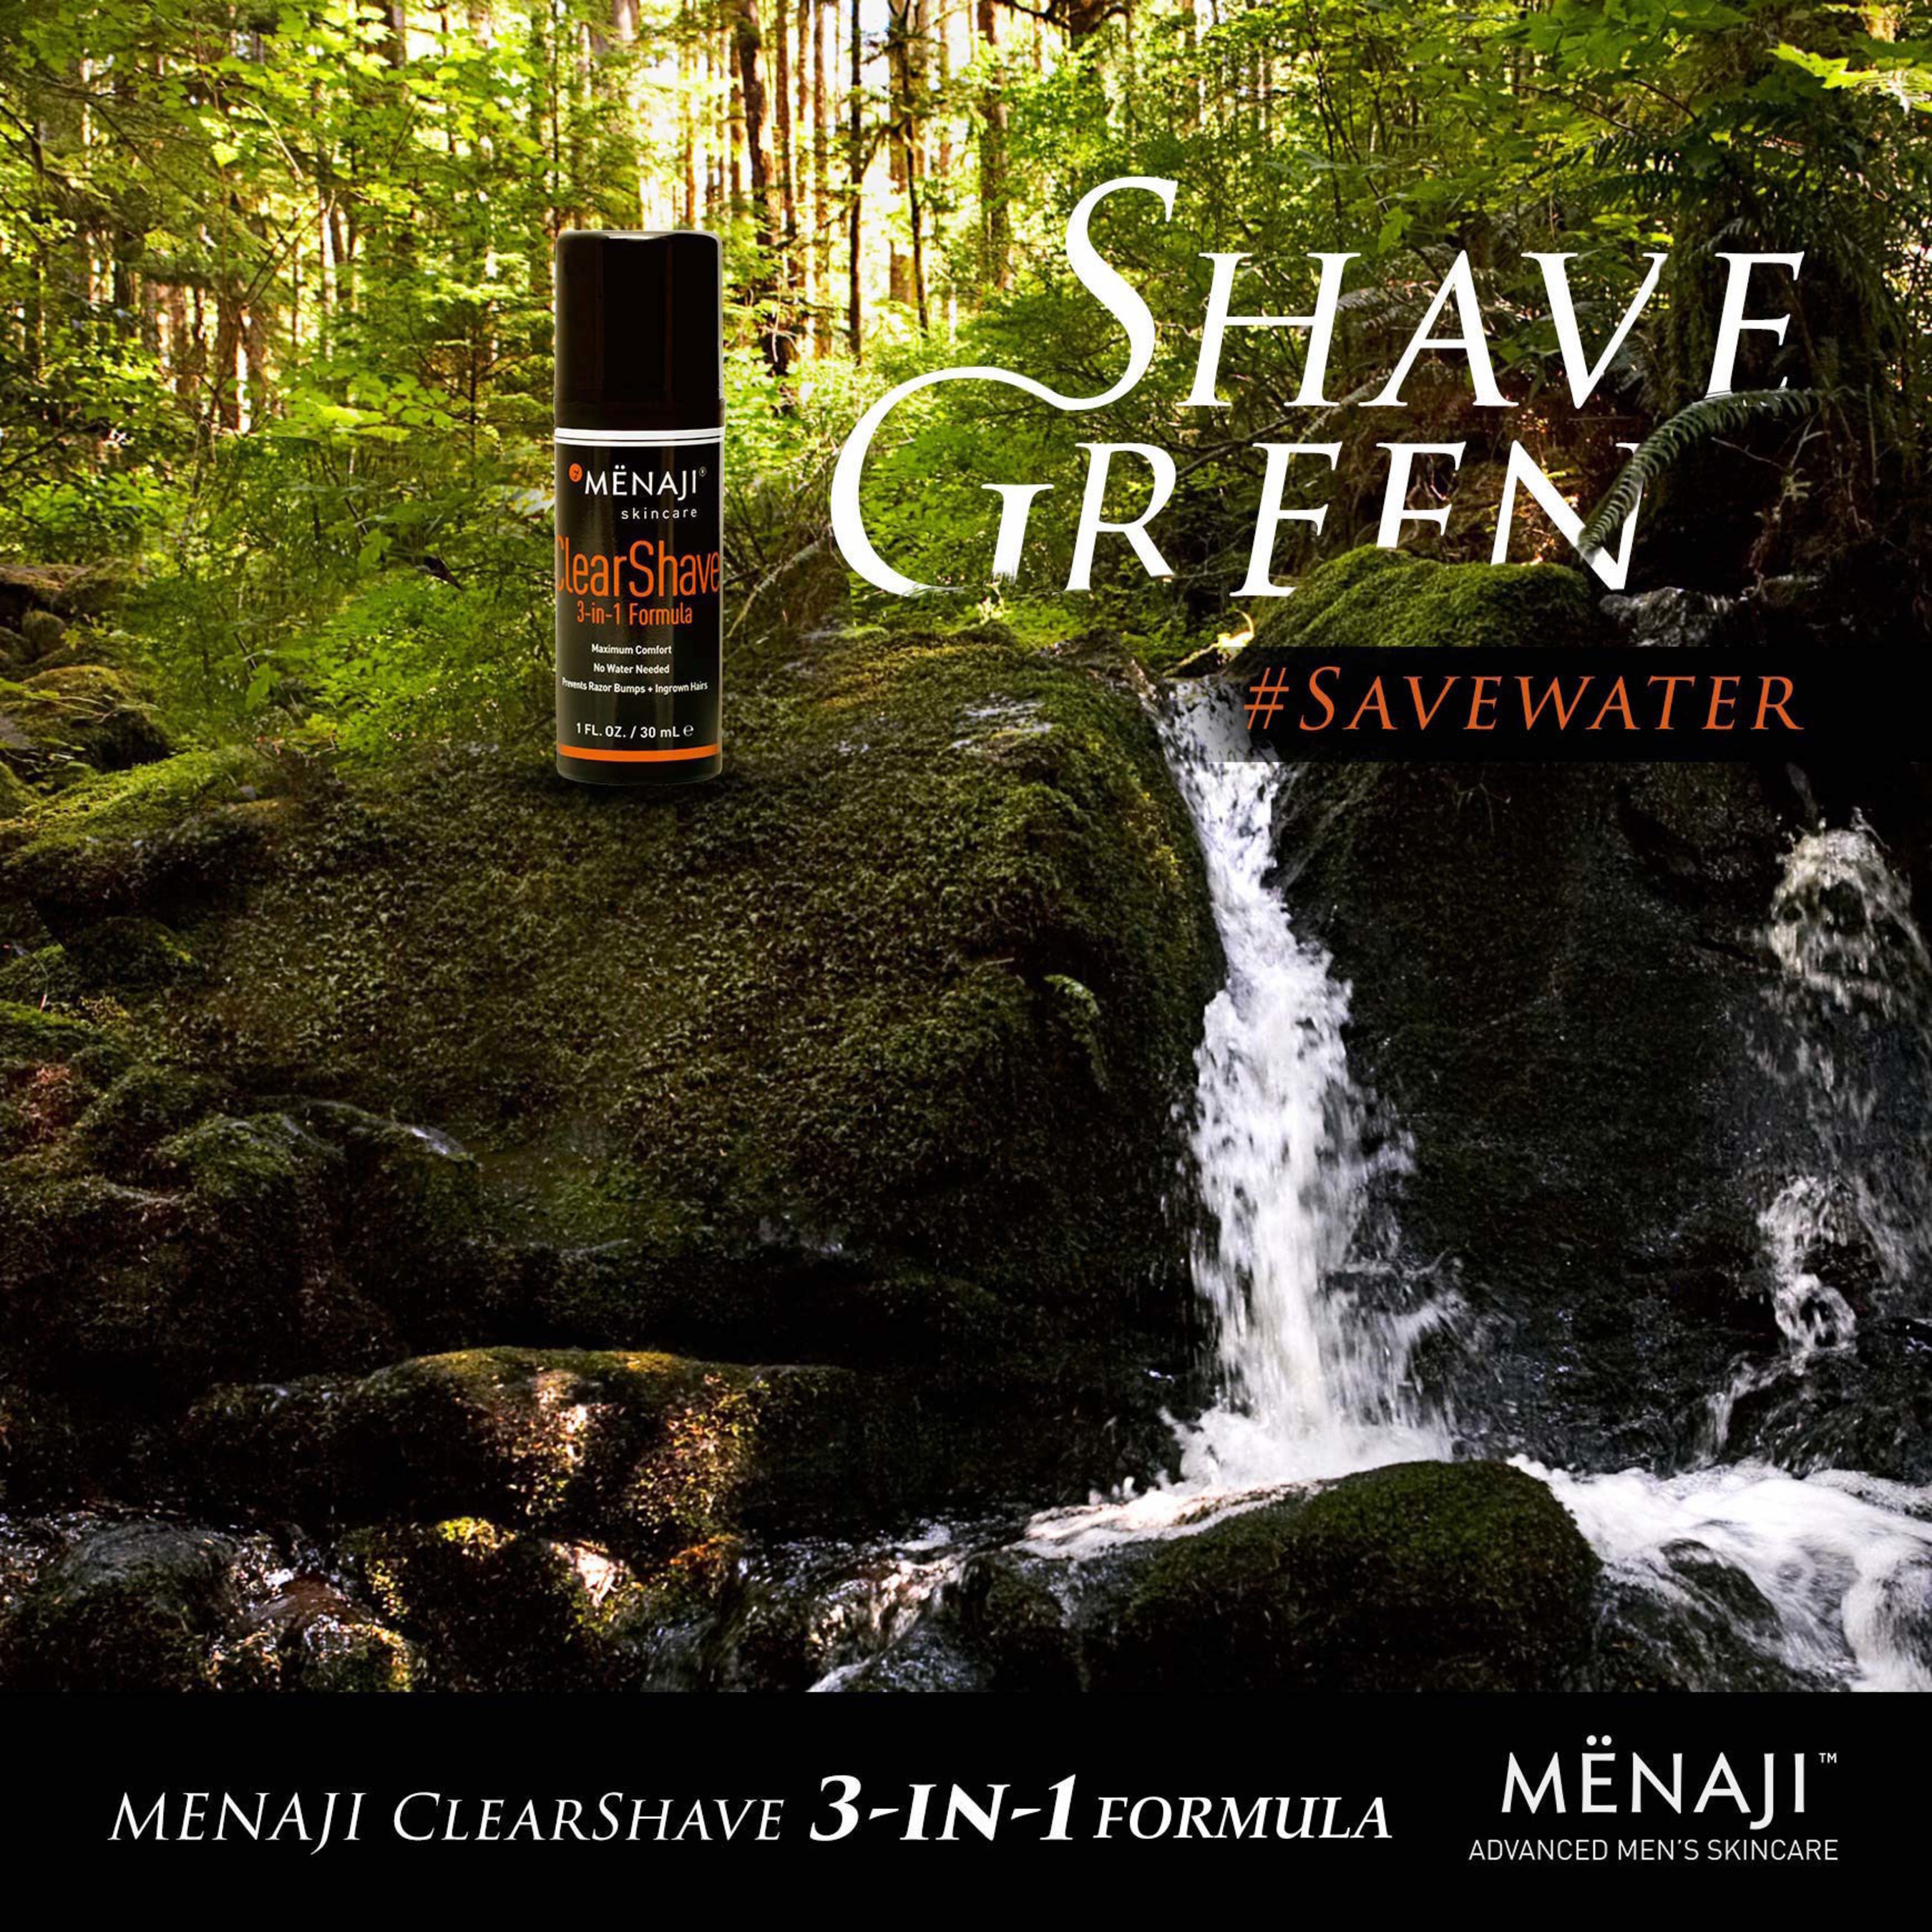 The only shave gel that does not lather and saves 3 gallons of water during your morning grooming routine, the ClearShave 3-in-1 Formula by MENAJI.